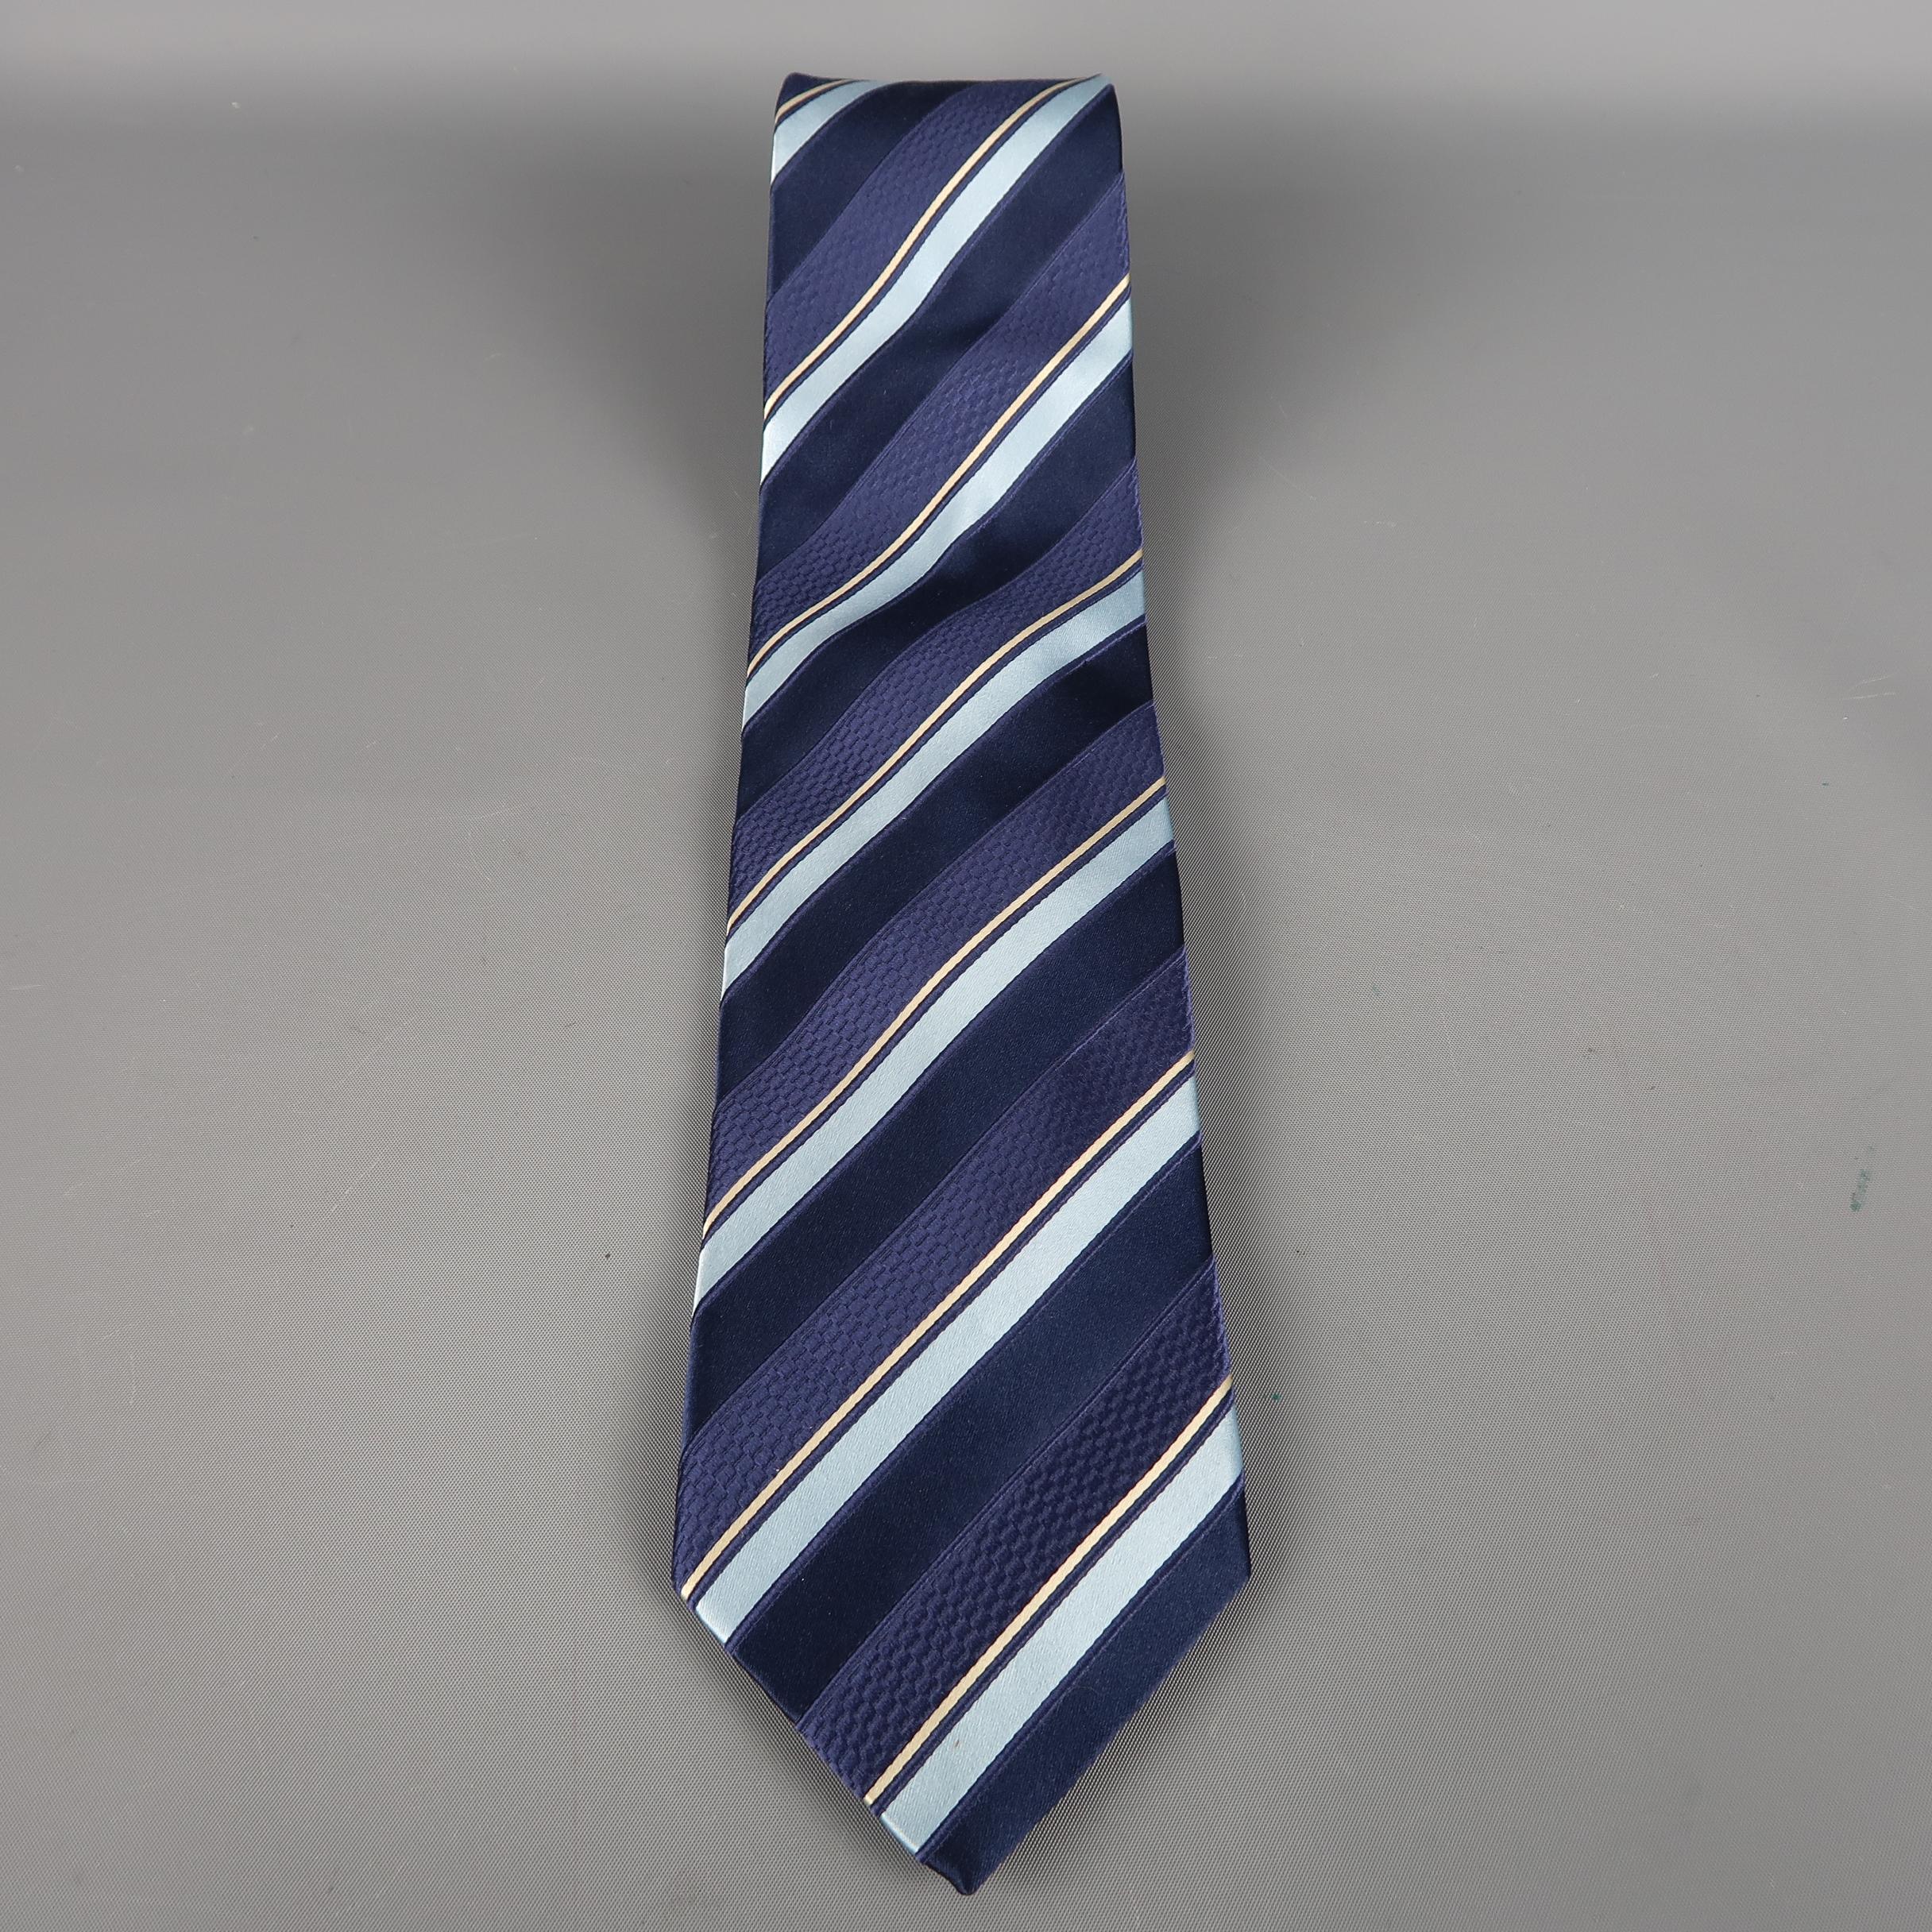 ERMENEGILDO ZEGNA tie come in navy silk  with all over blue and silver diagonal stripes. Made in Italy.
 
Excellent Pre-Owned Condition.
 
Width: 3.5 in.
